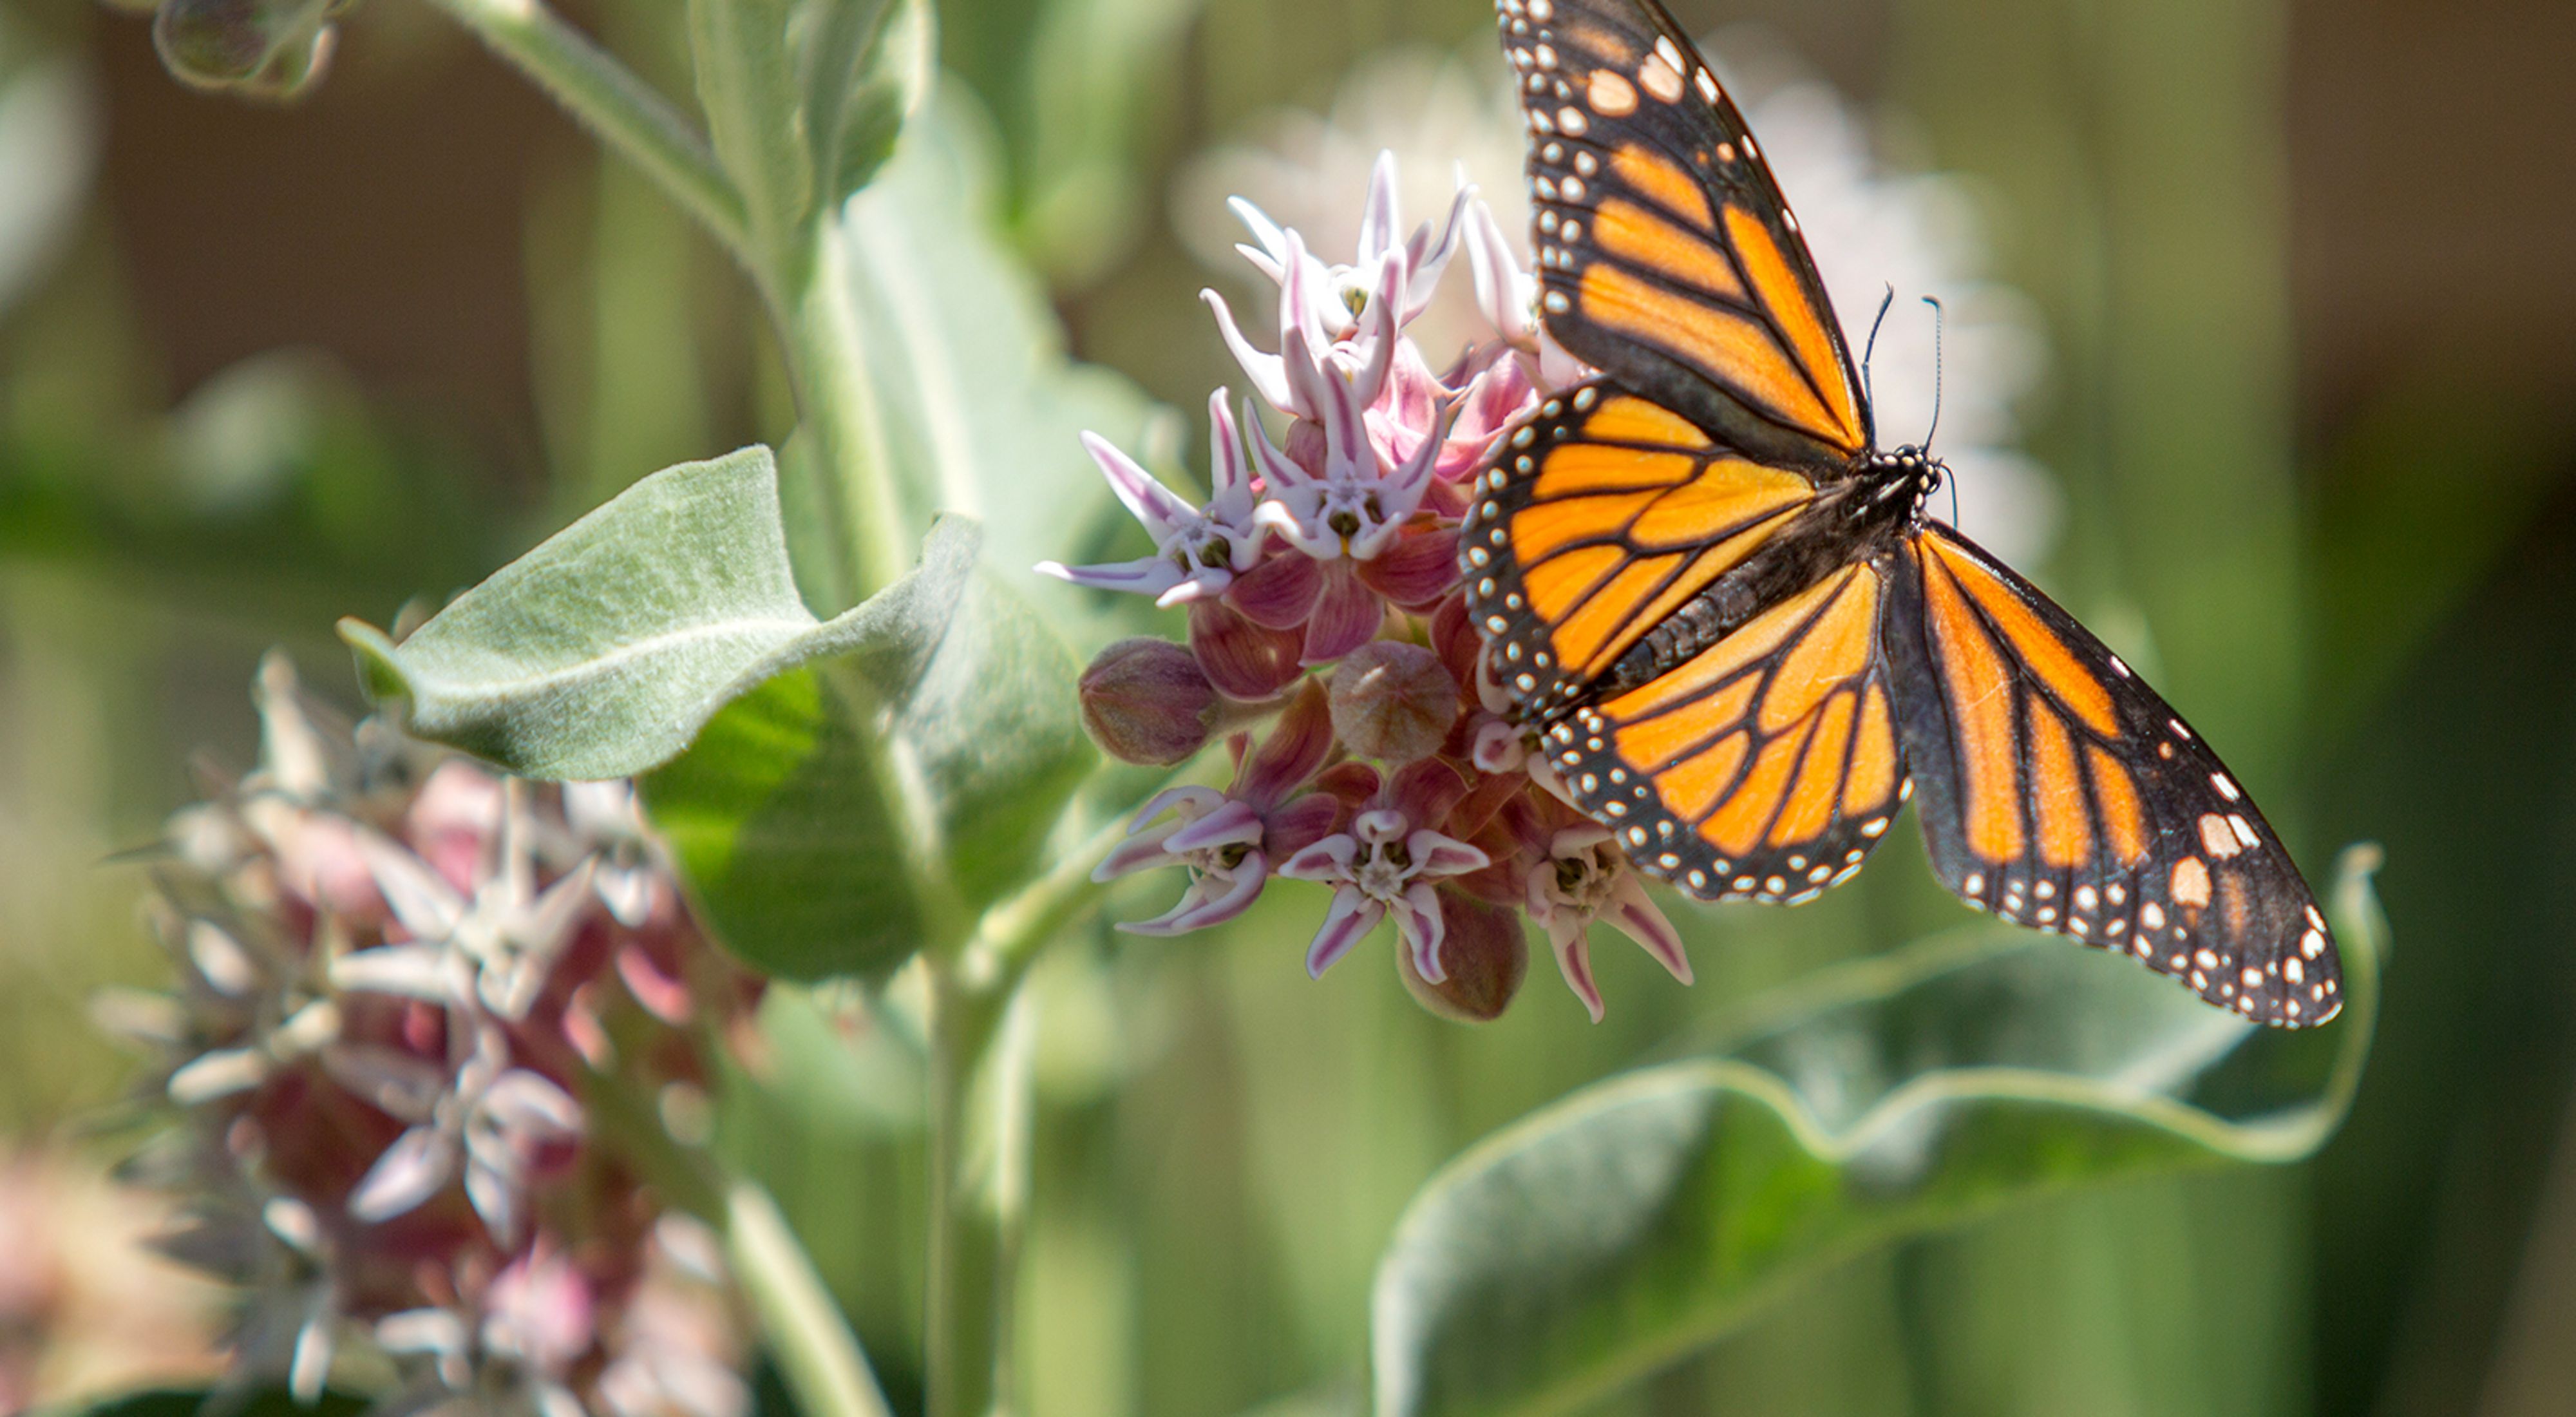 Close up of monarch butterfly on milkweed.